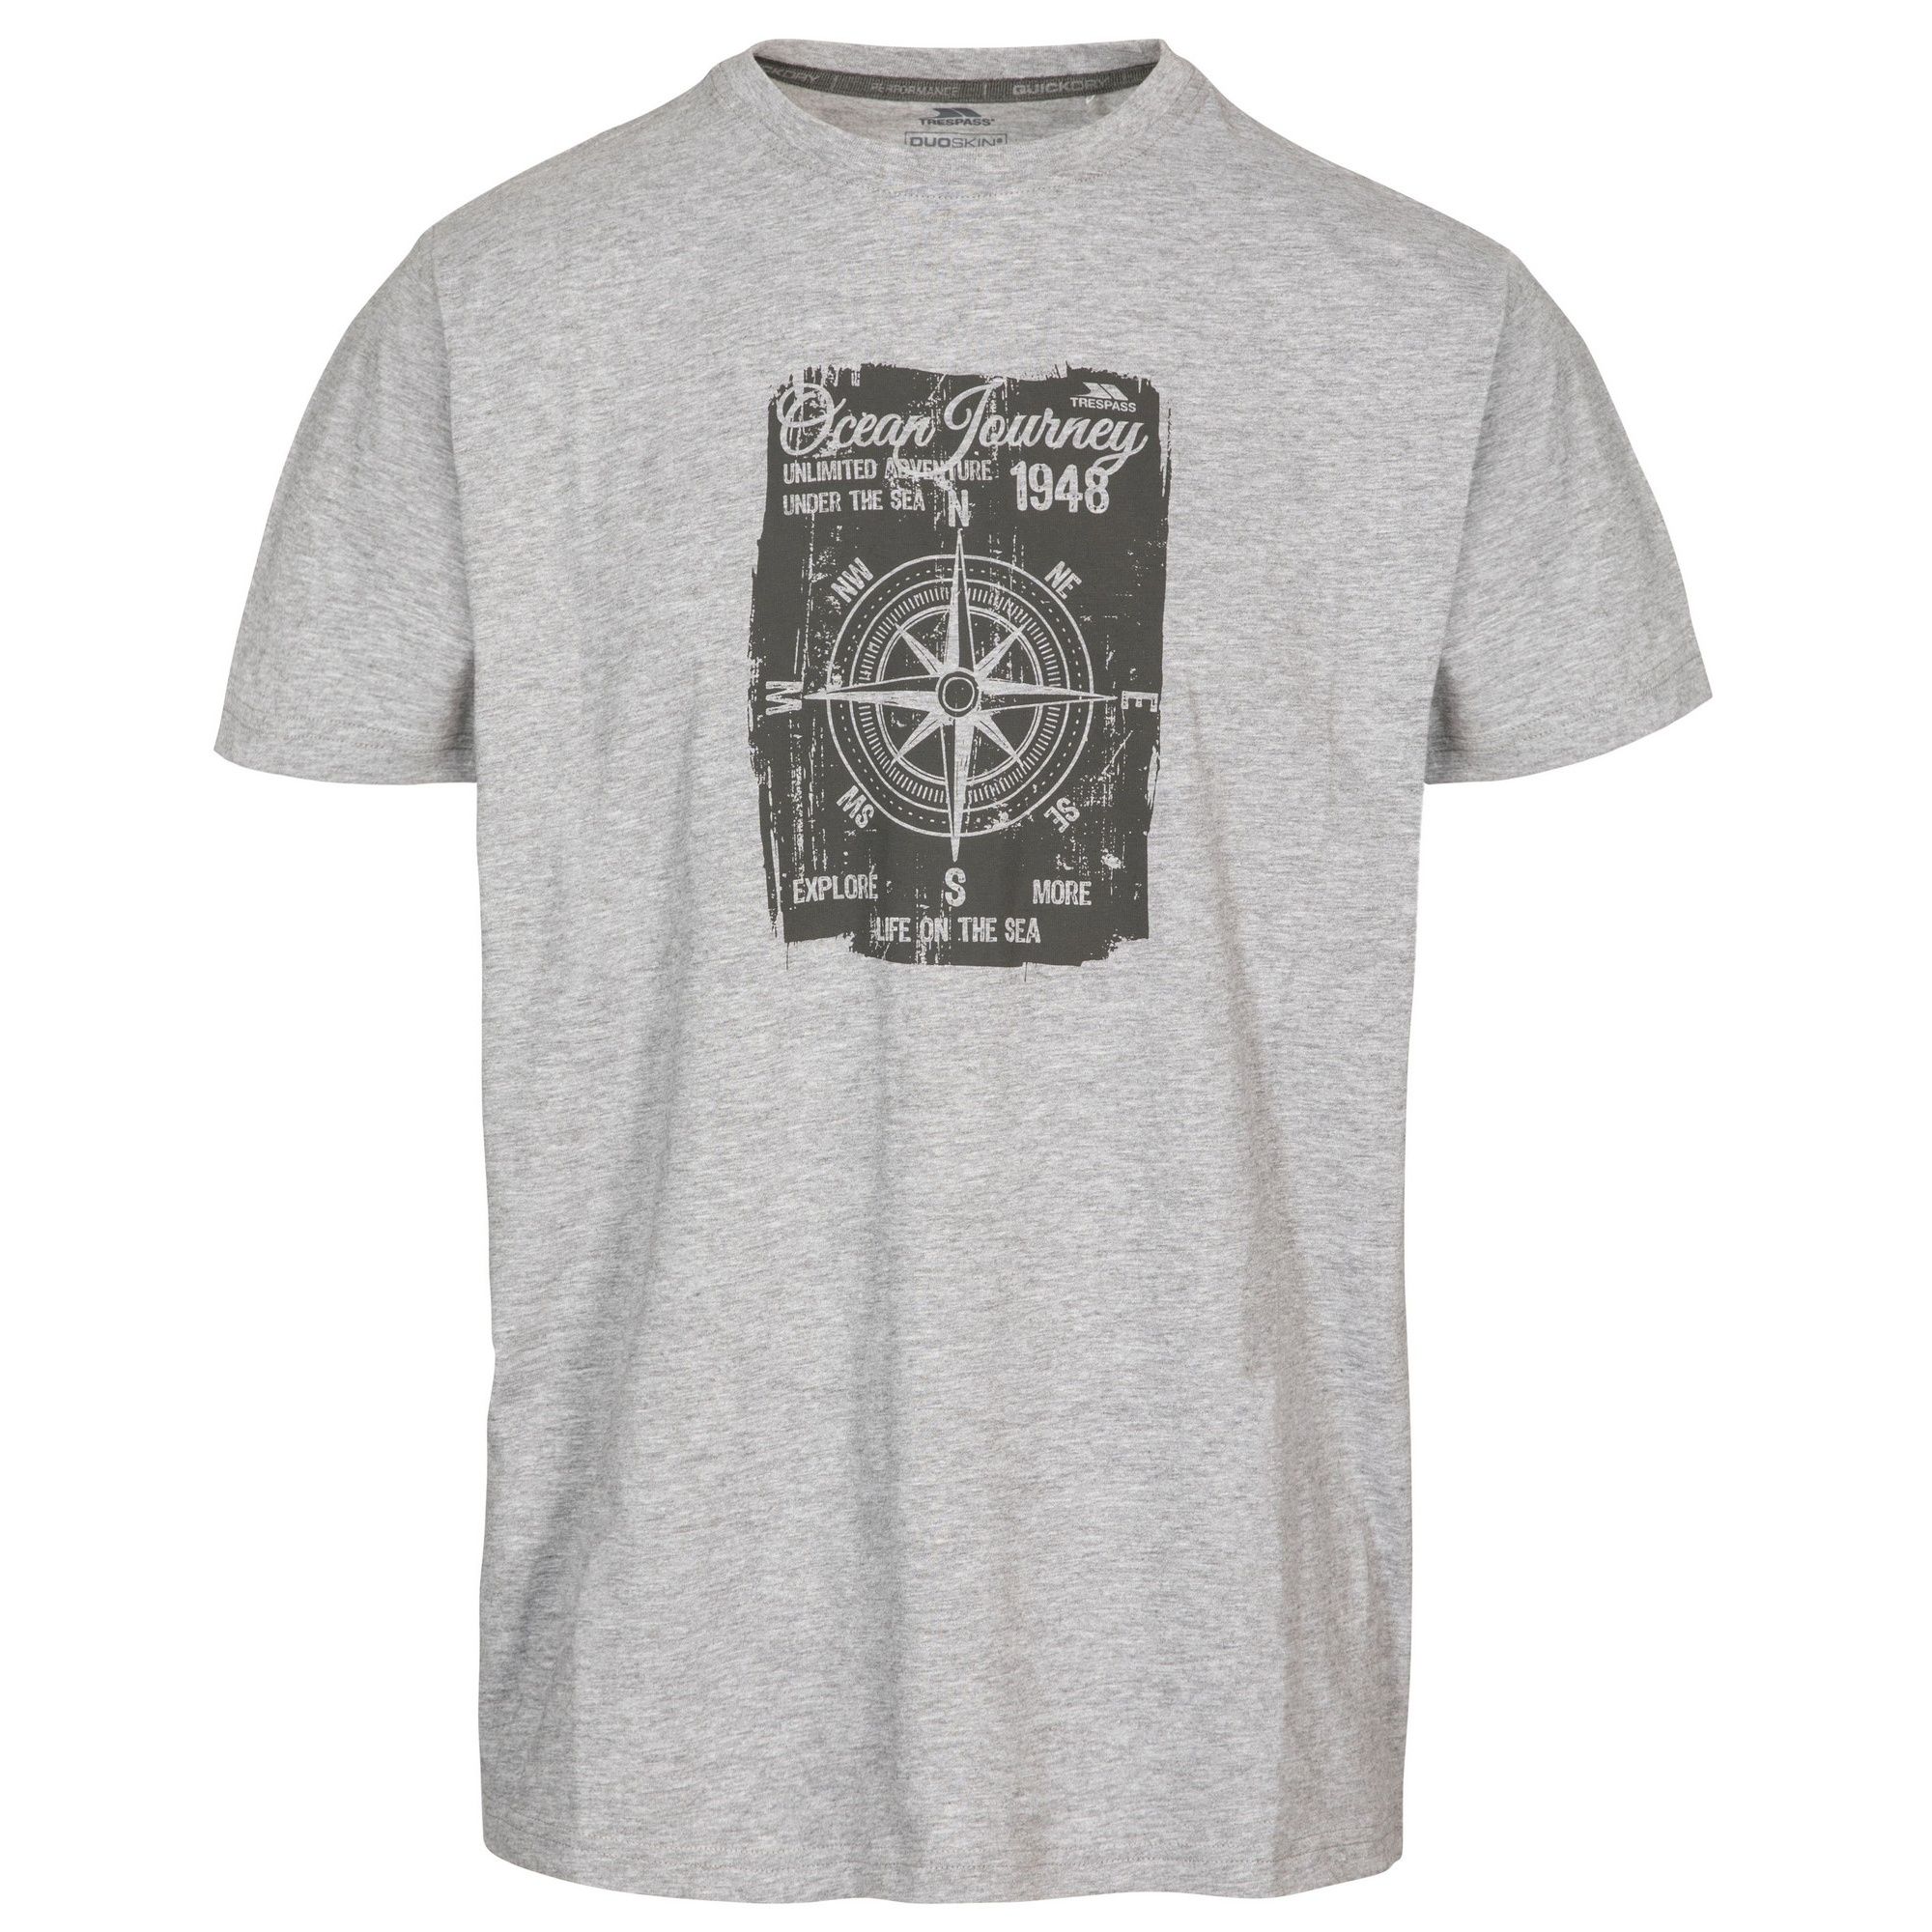 Mens short sleeve t-shirt with graphic print on chest. Round neck. quick dry. Materials: 60% cotton/ 40% polyester.